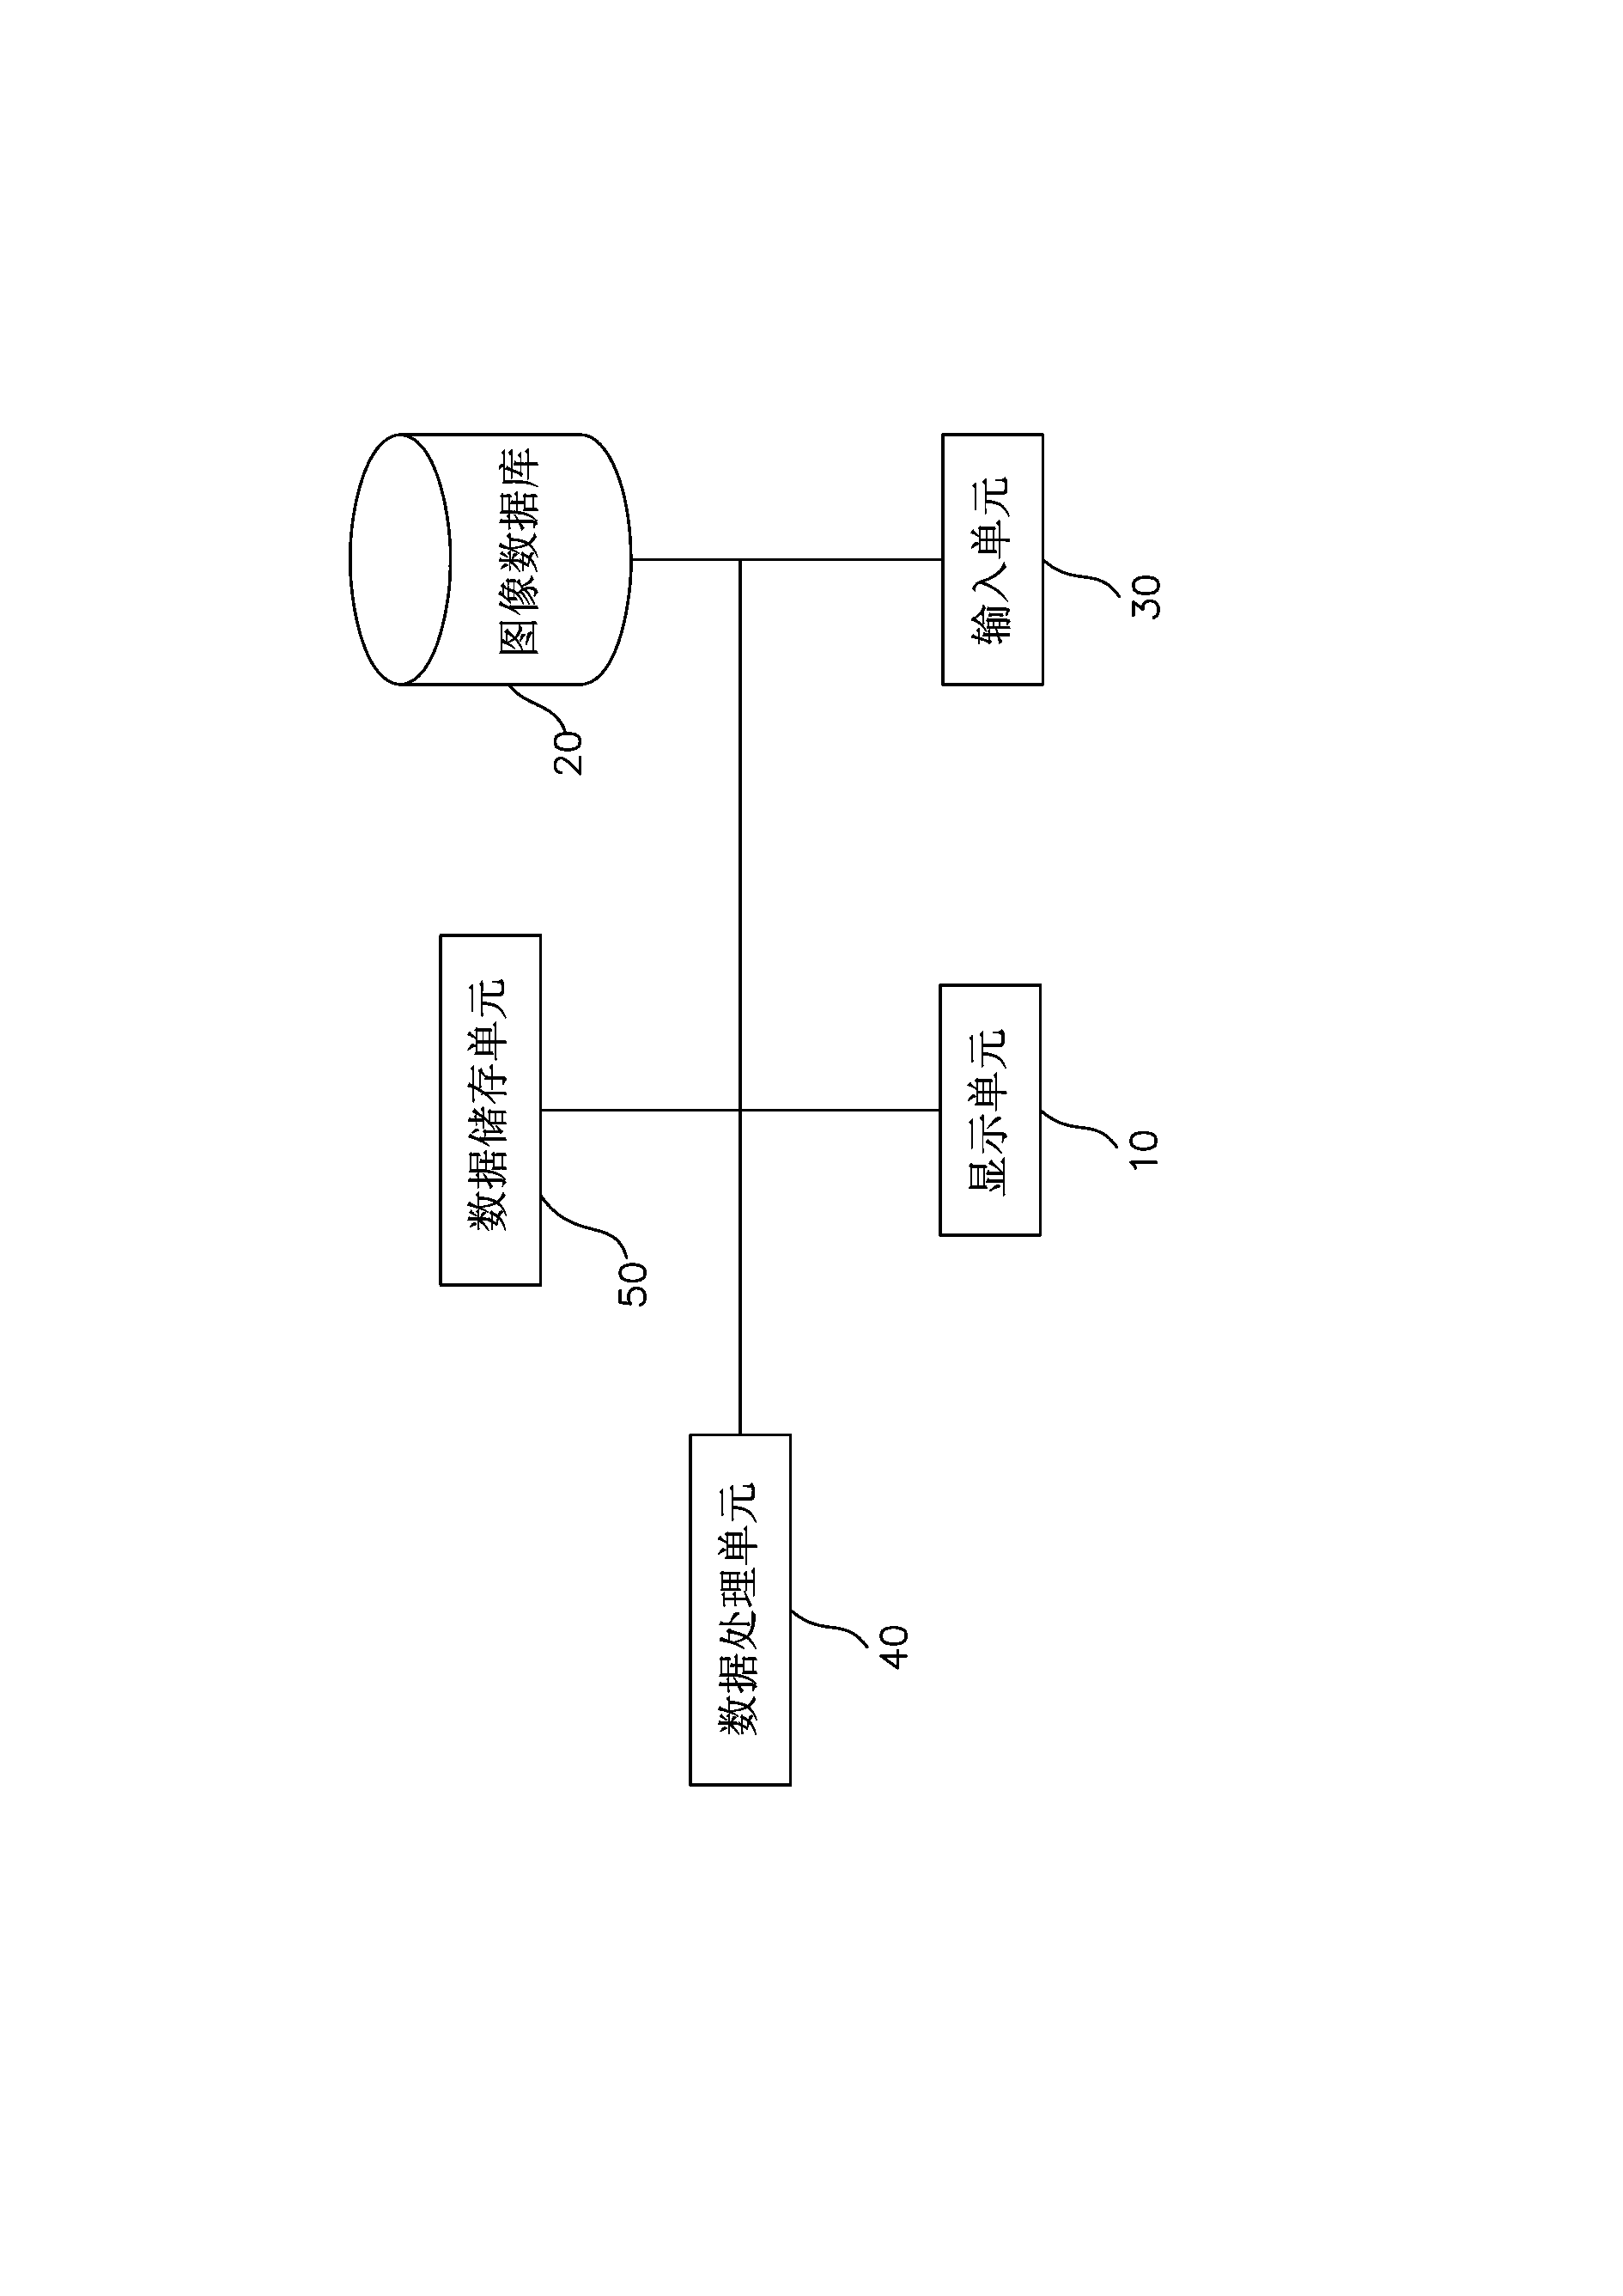 Password indirect confirming device and method